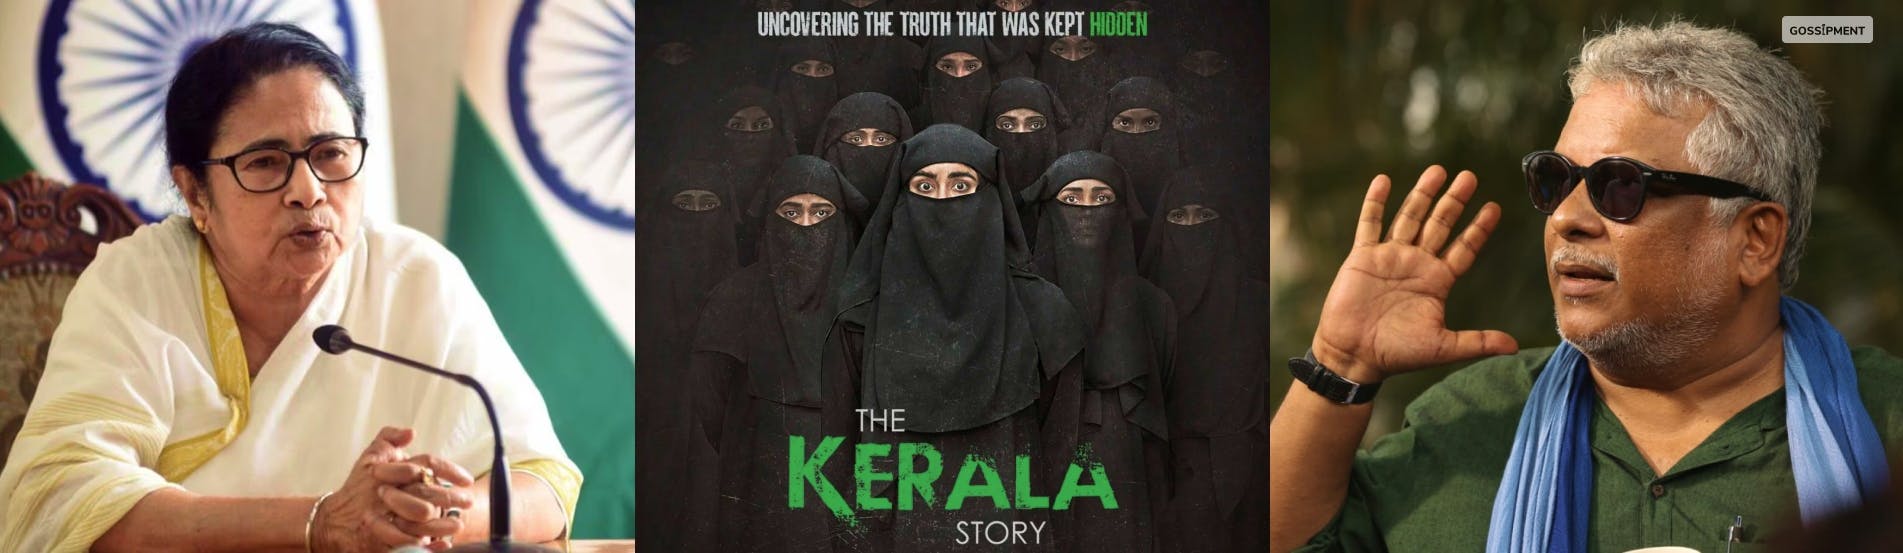 Cover Image for The Kerala Story: West Bengal Government Decided To Ban The Film, Producer Reacts